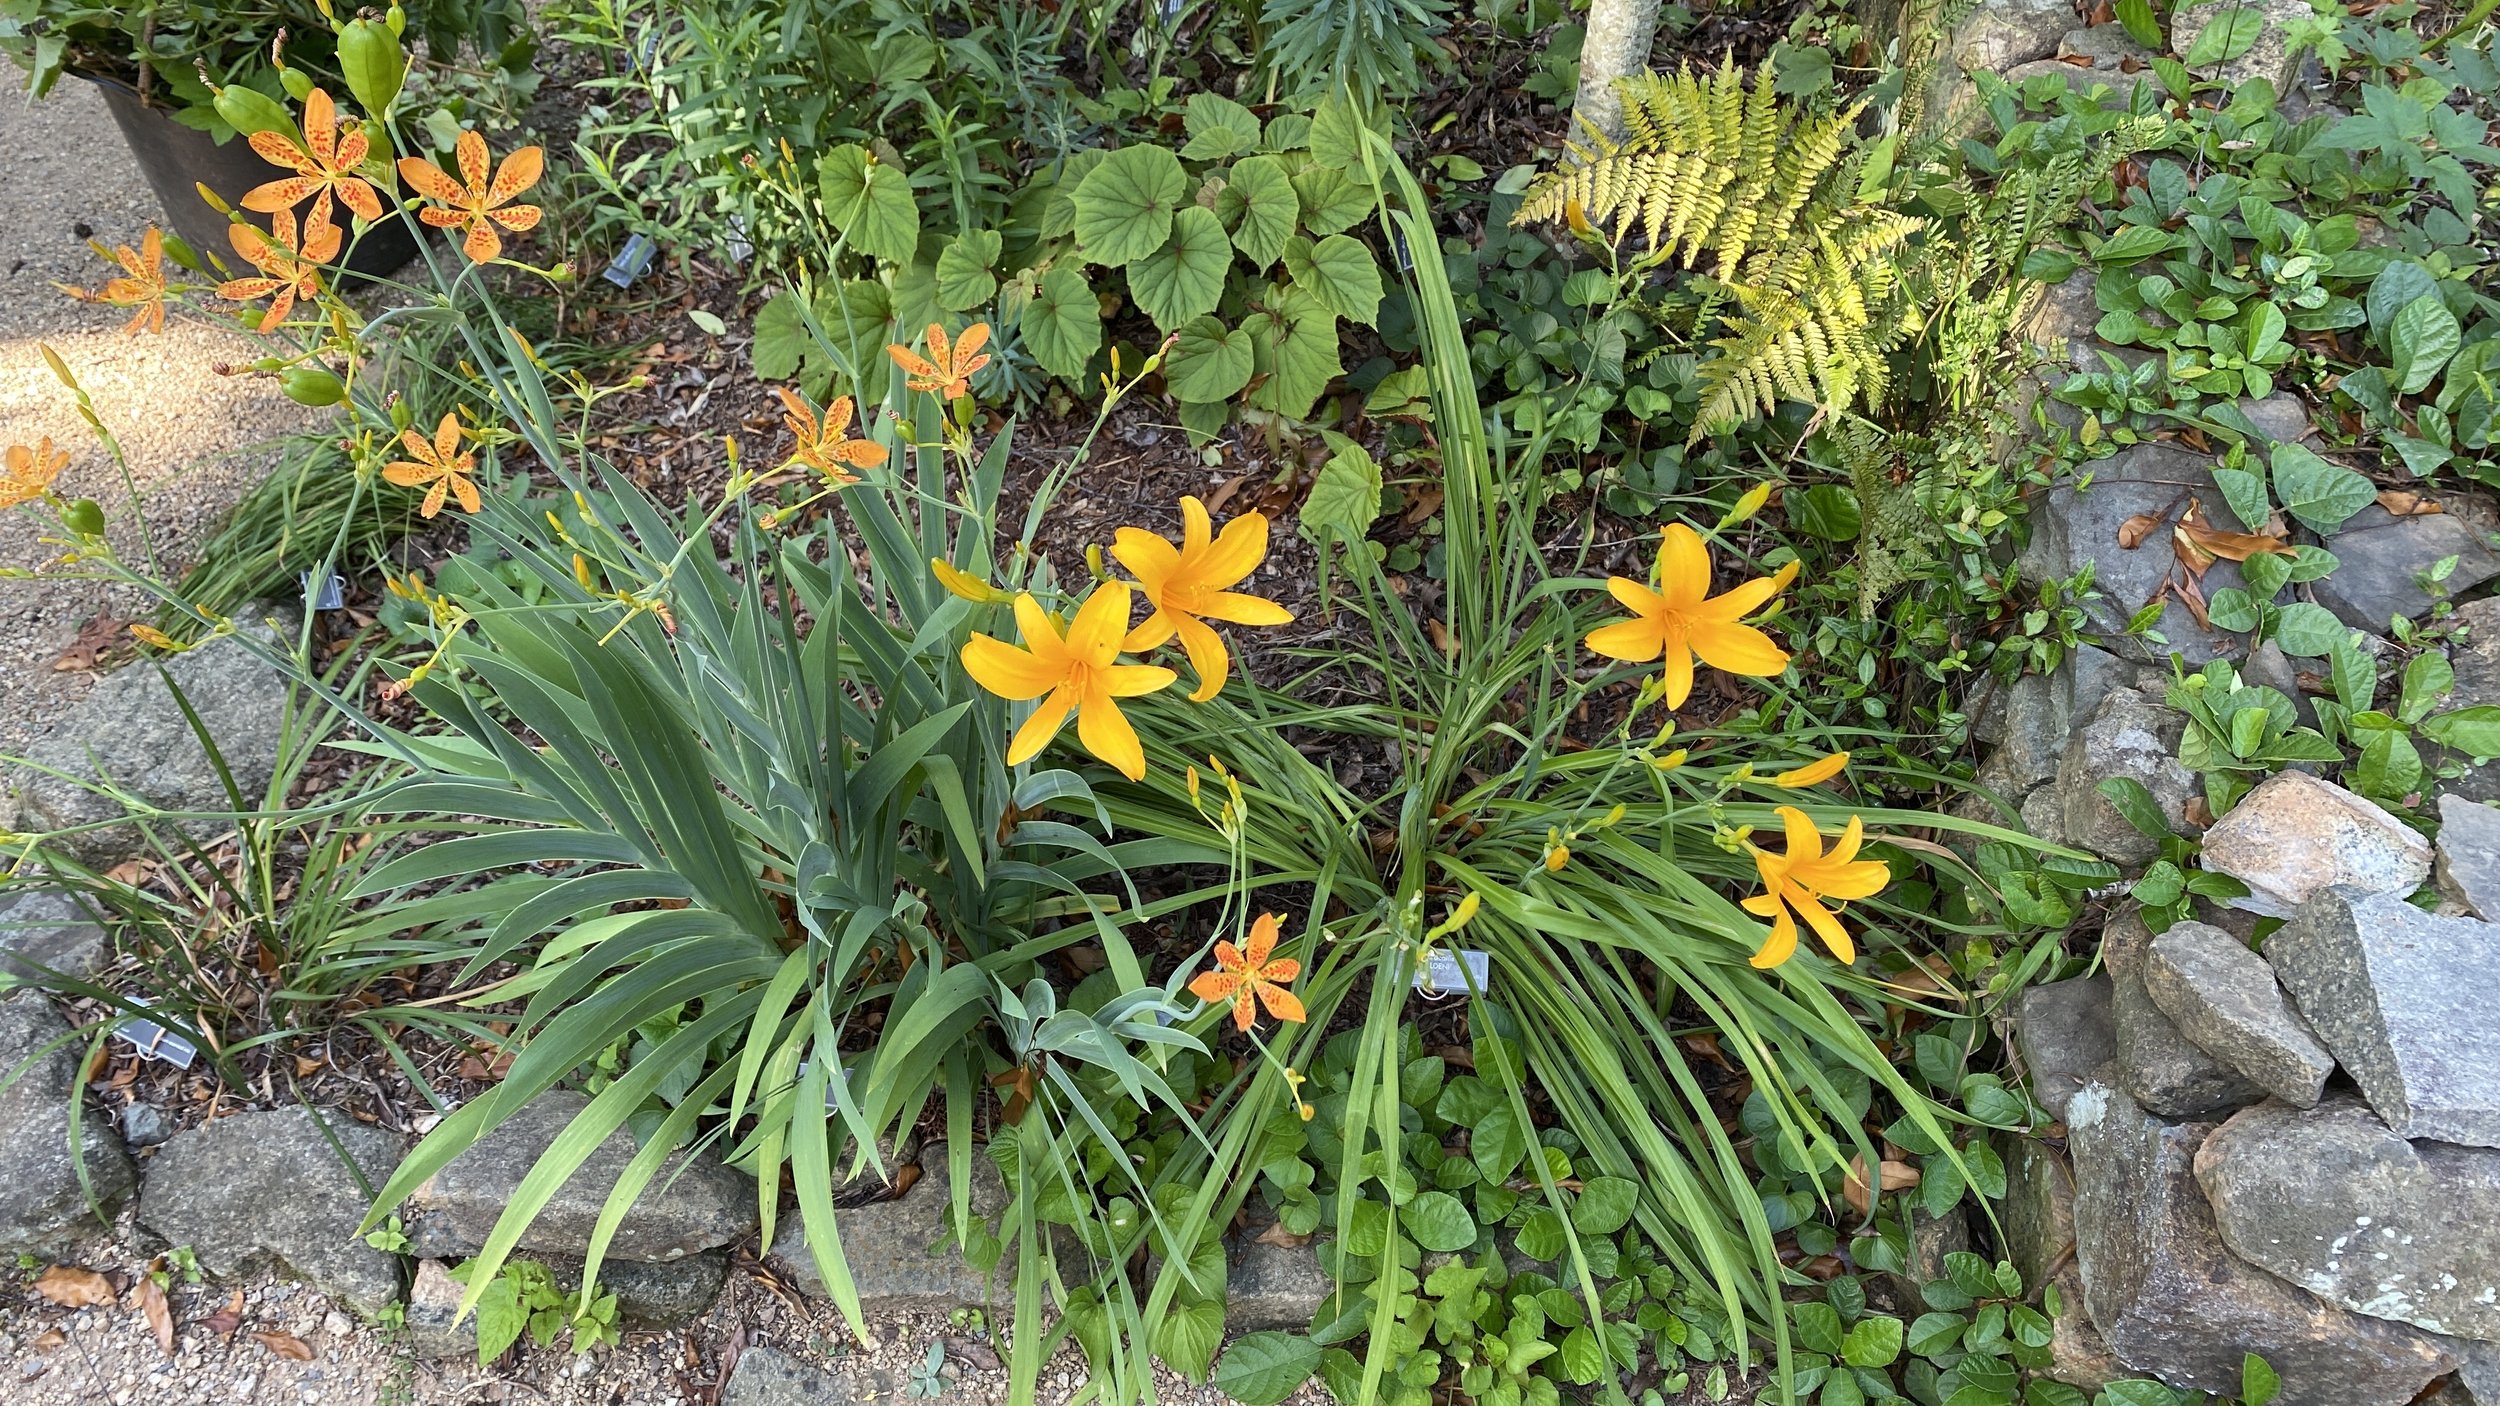  Here’s  Hemerocallis  ‘Goldeni’, echoing the color of  Iris domestica , the blackberry lily. 